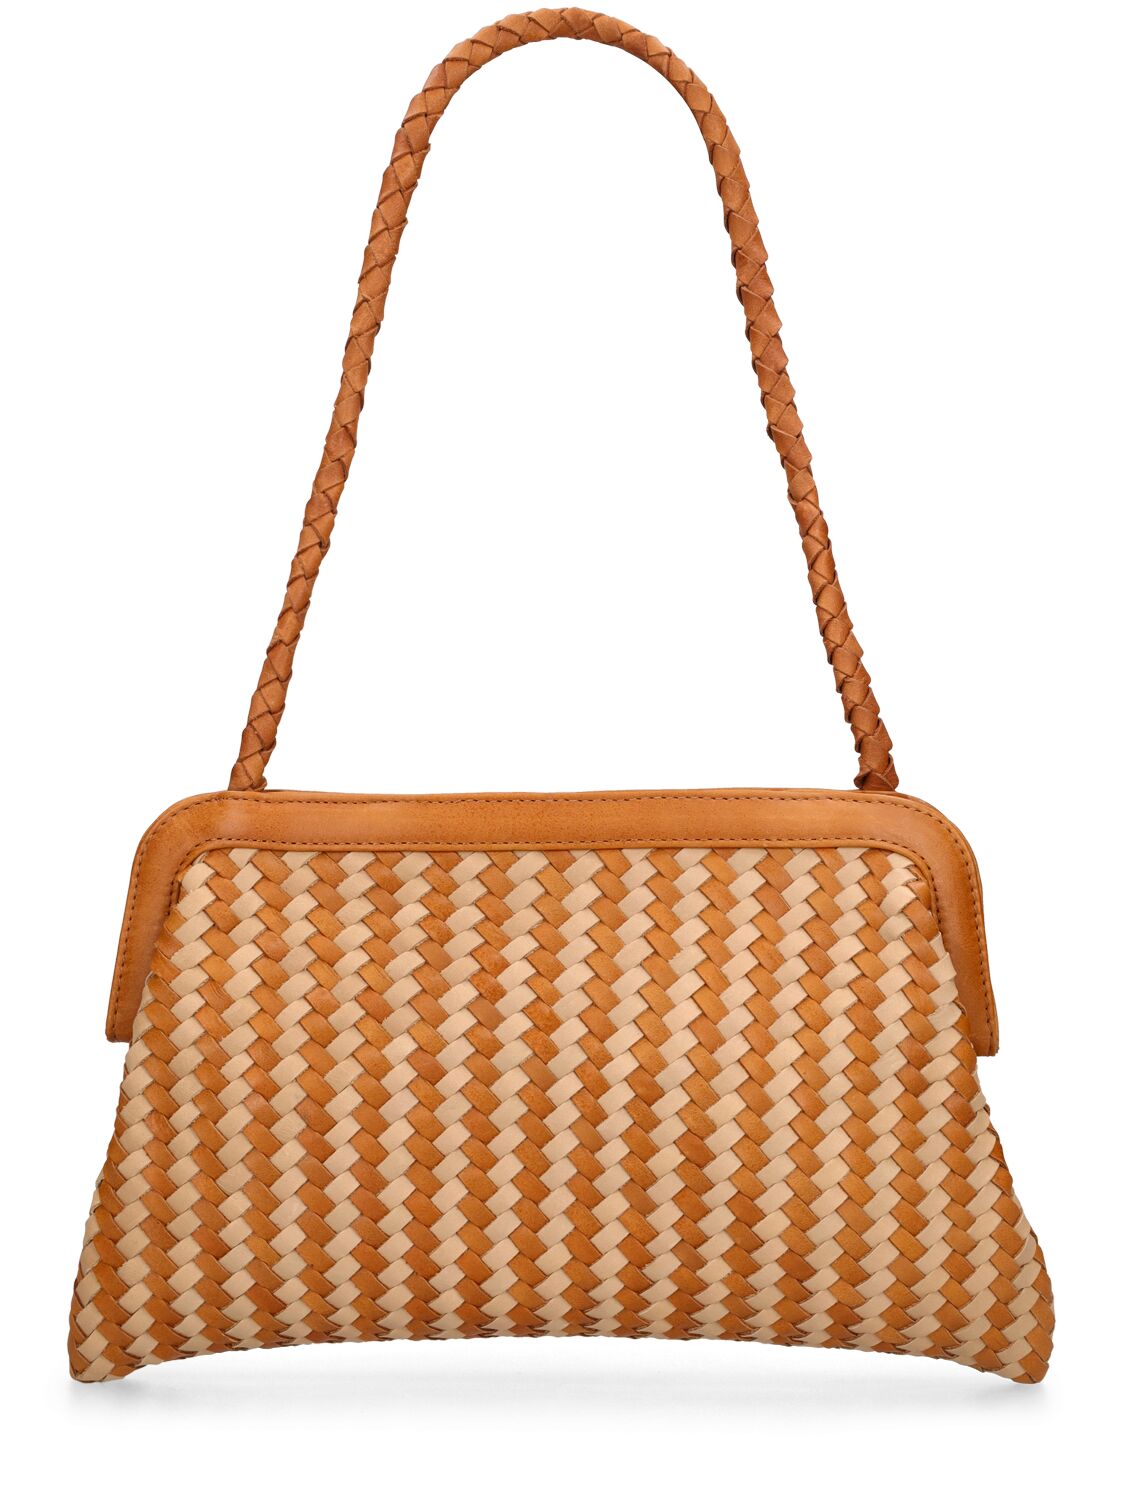 Bembien Le Sac Woven Leather Shoulder Bag In Cocoa Stripe